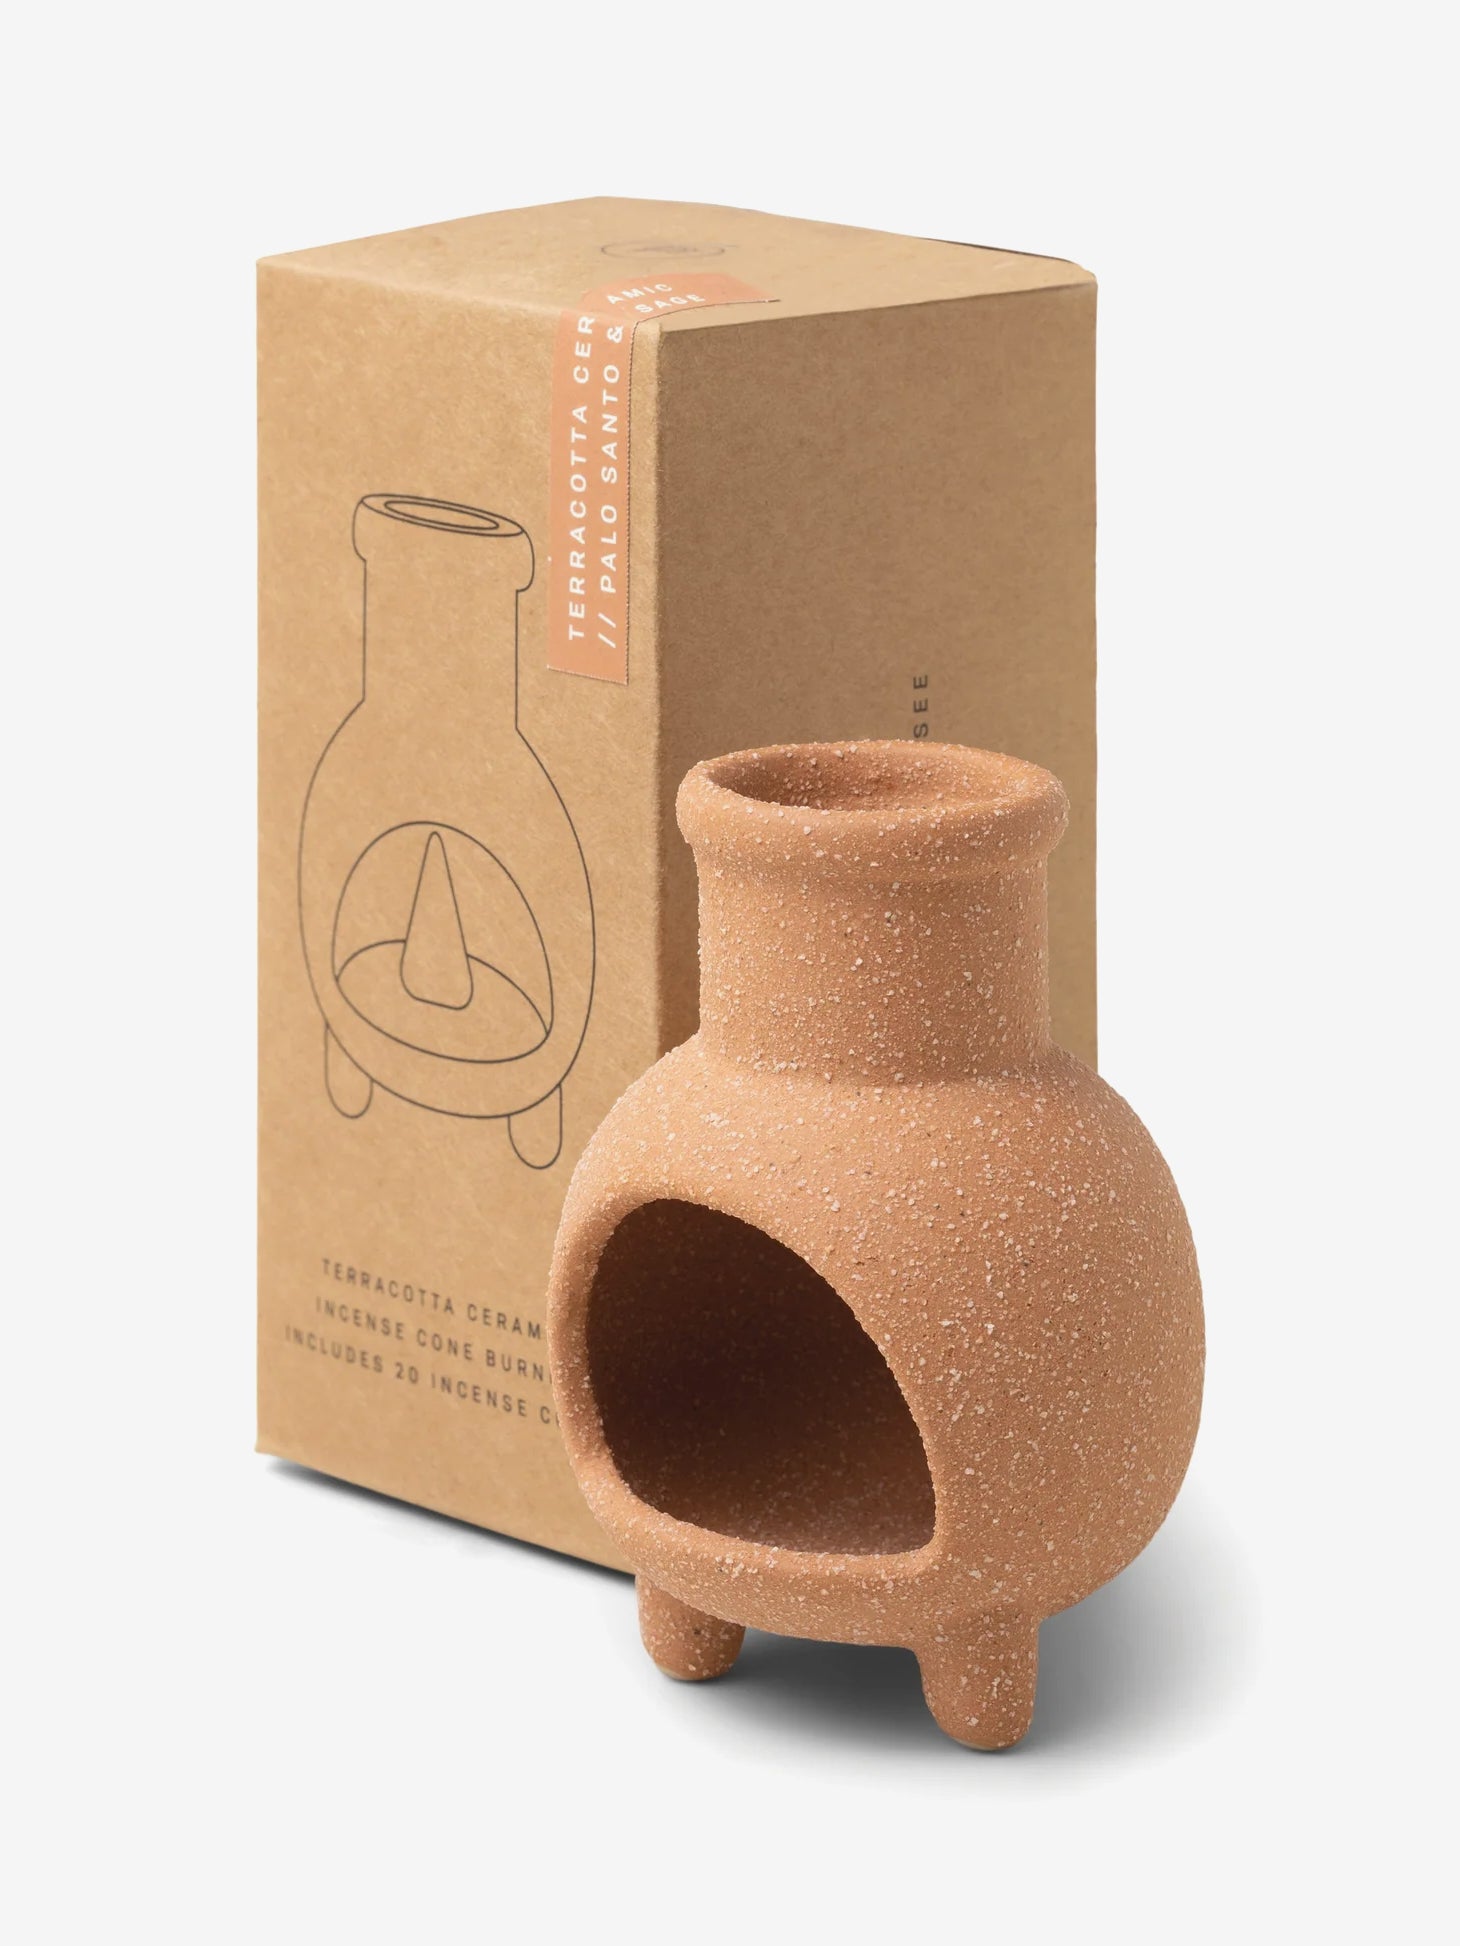 Paddywax Chiminea Ceramic Incense Holder with Cones - Palo Santo & Sage